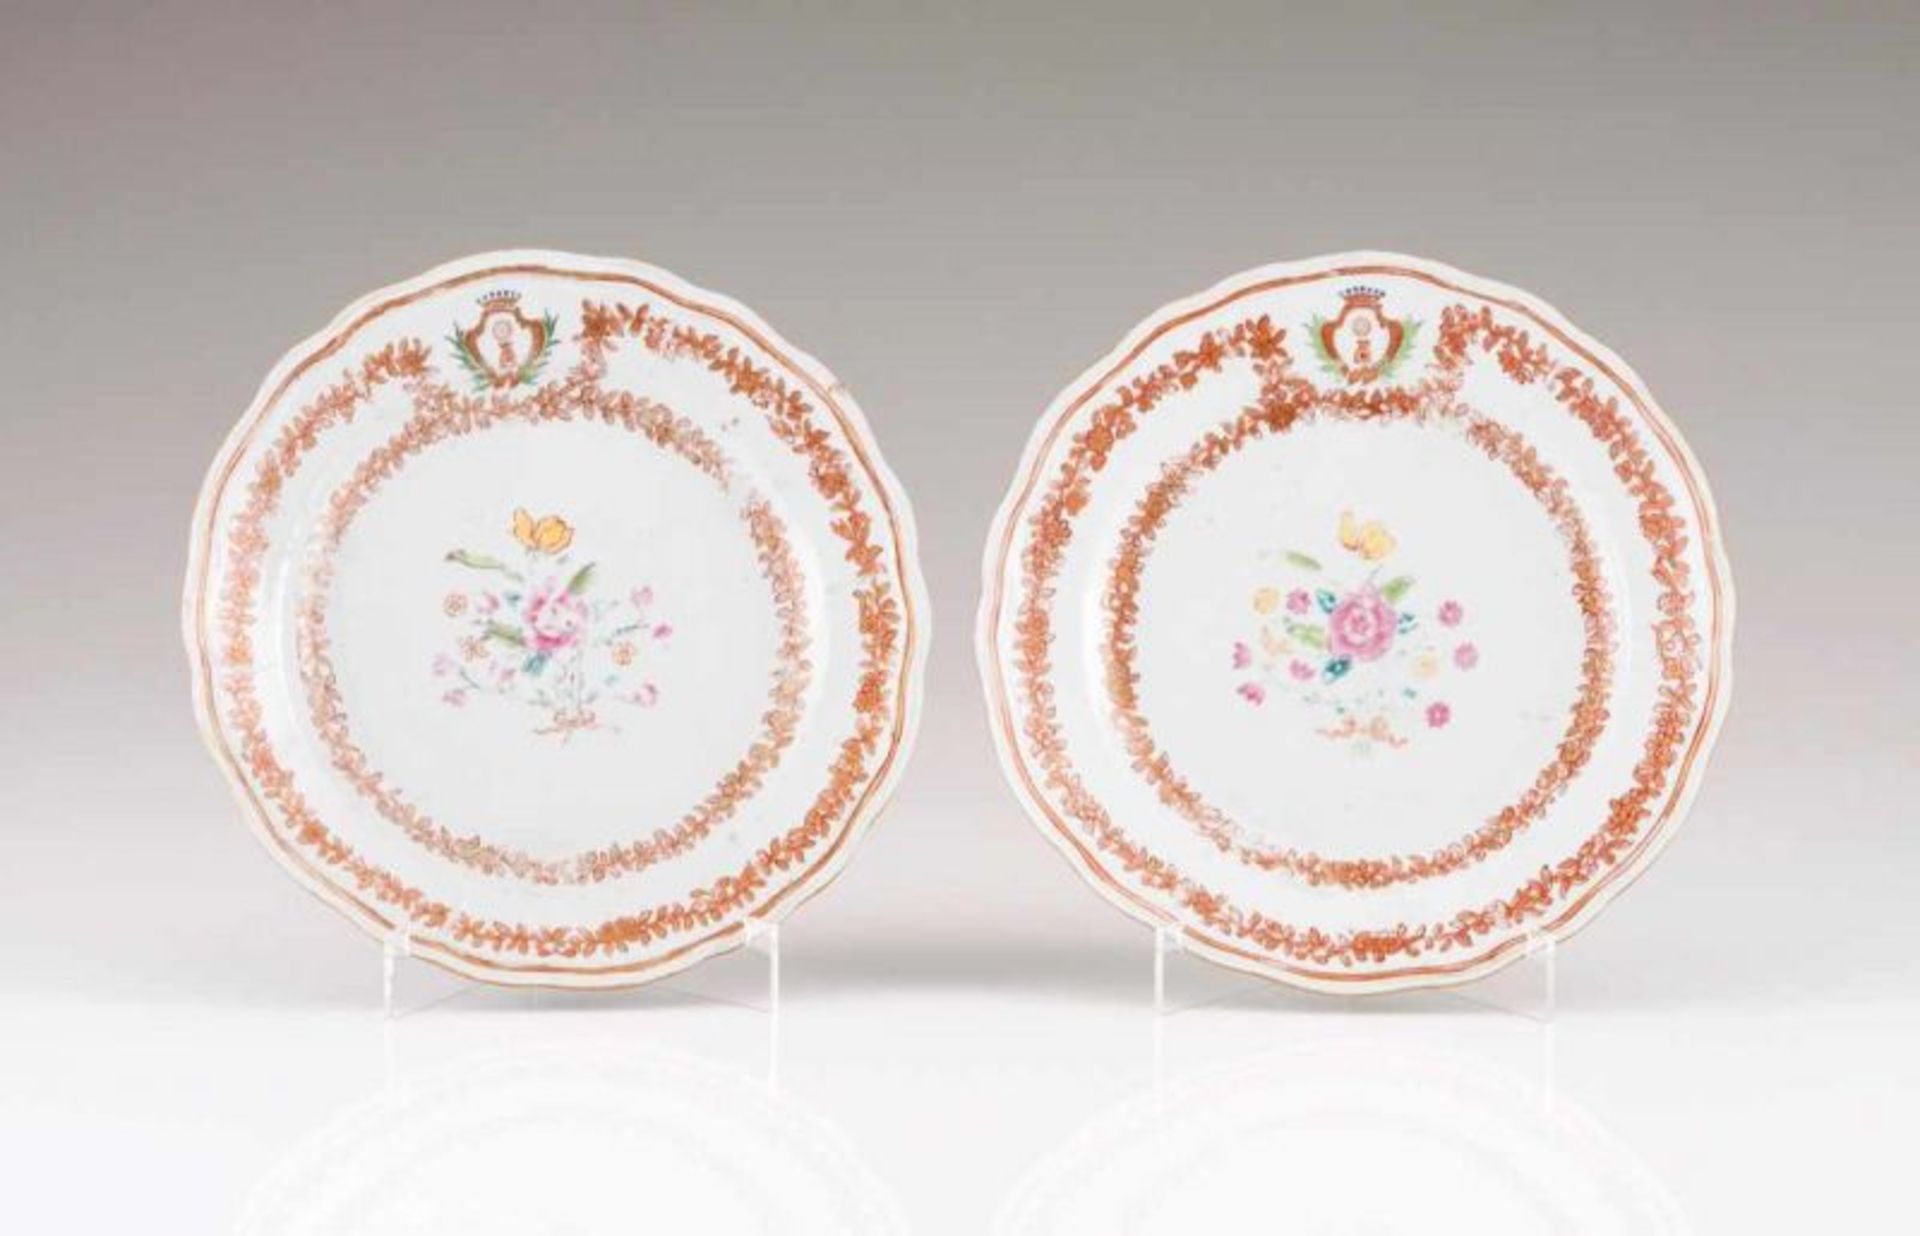 A pair of scalloped soup plates Chinese export porcelain Polychrome and gilt decoration depicting